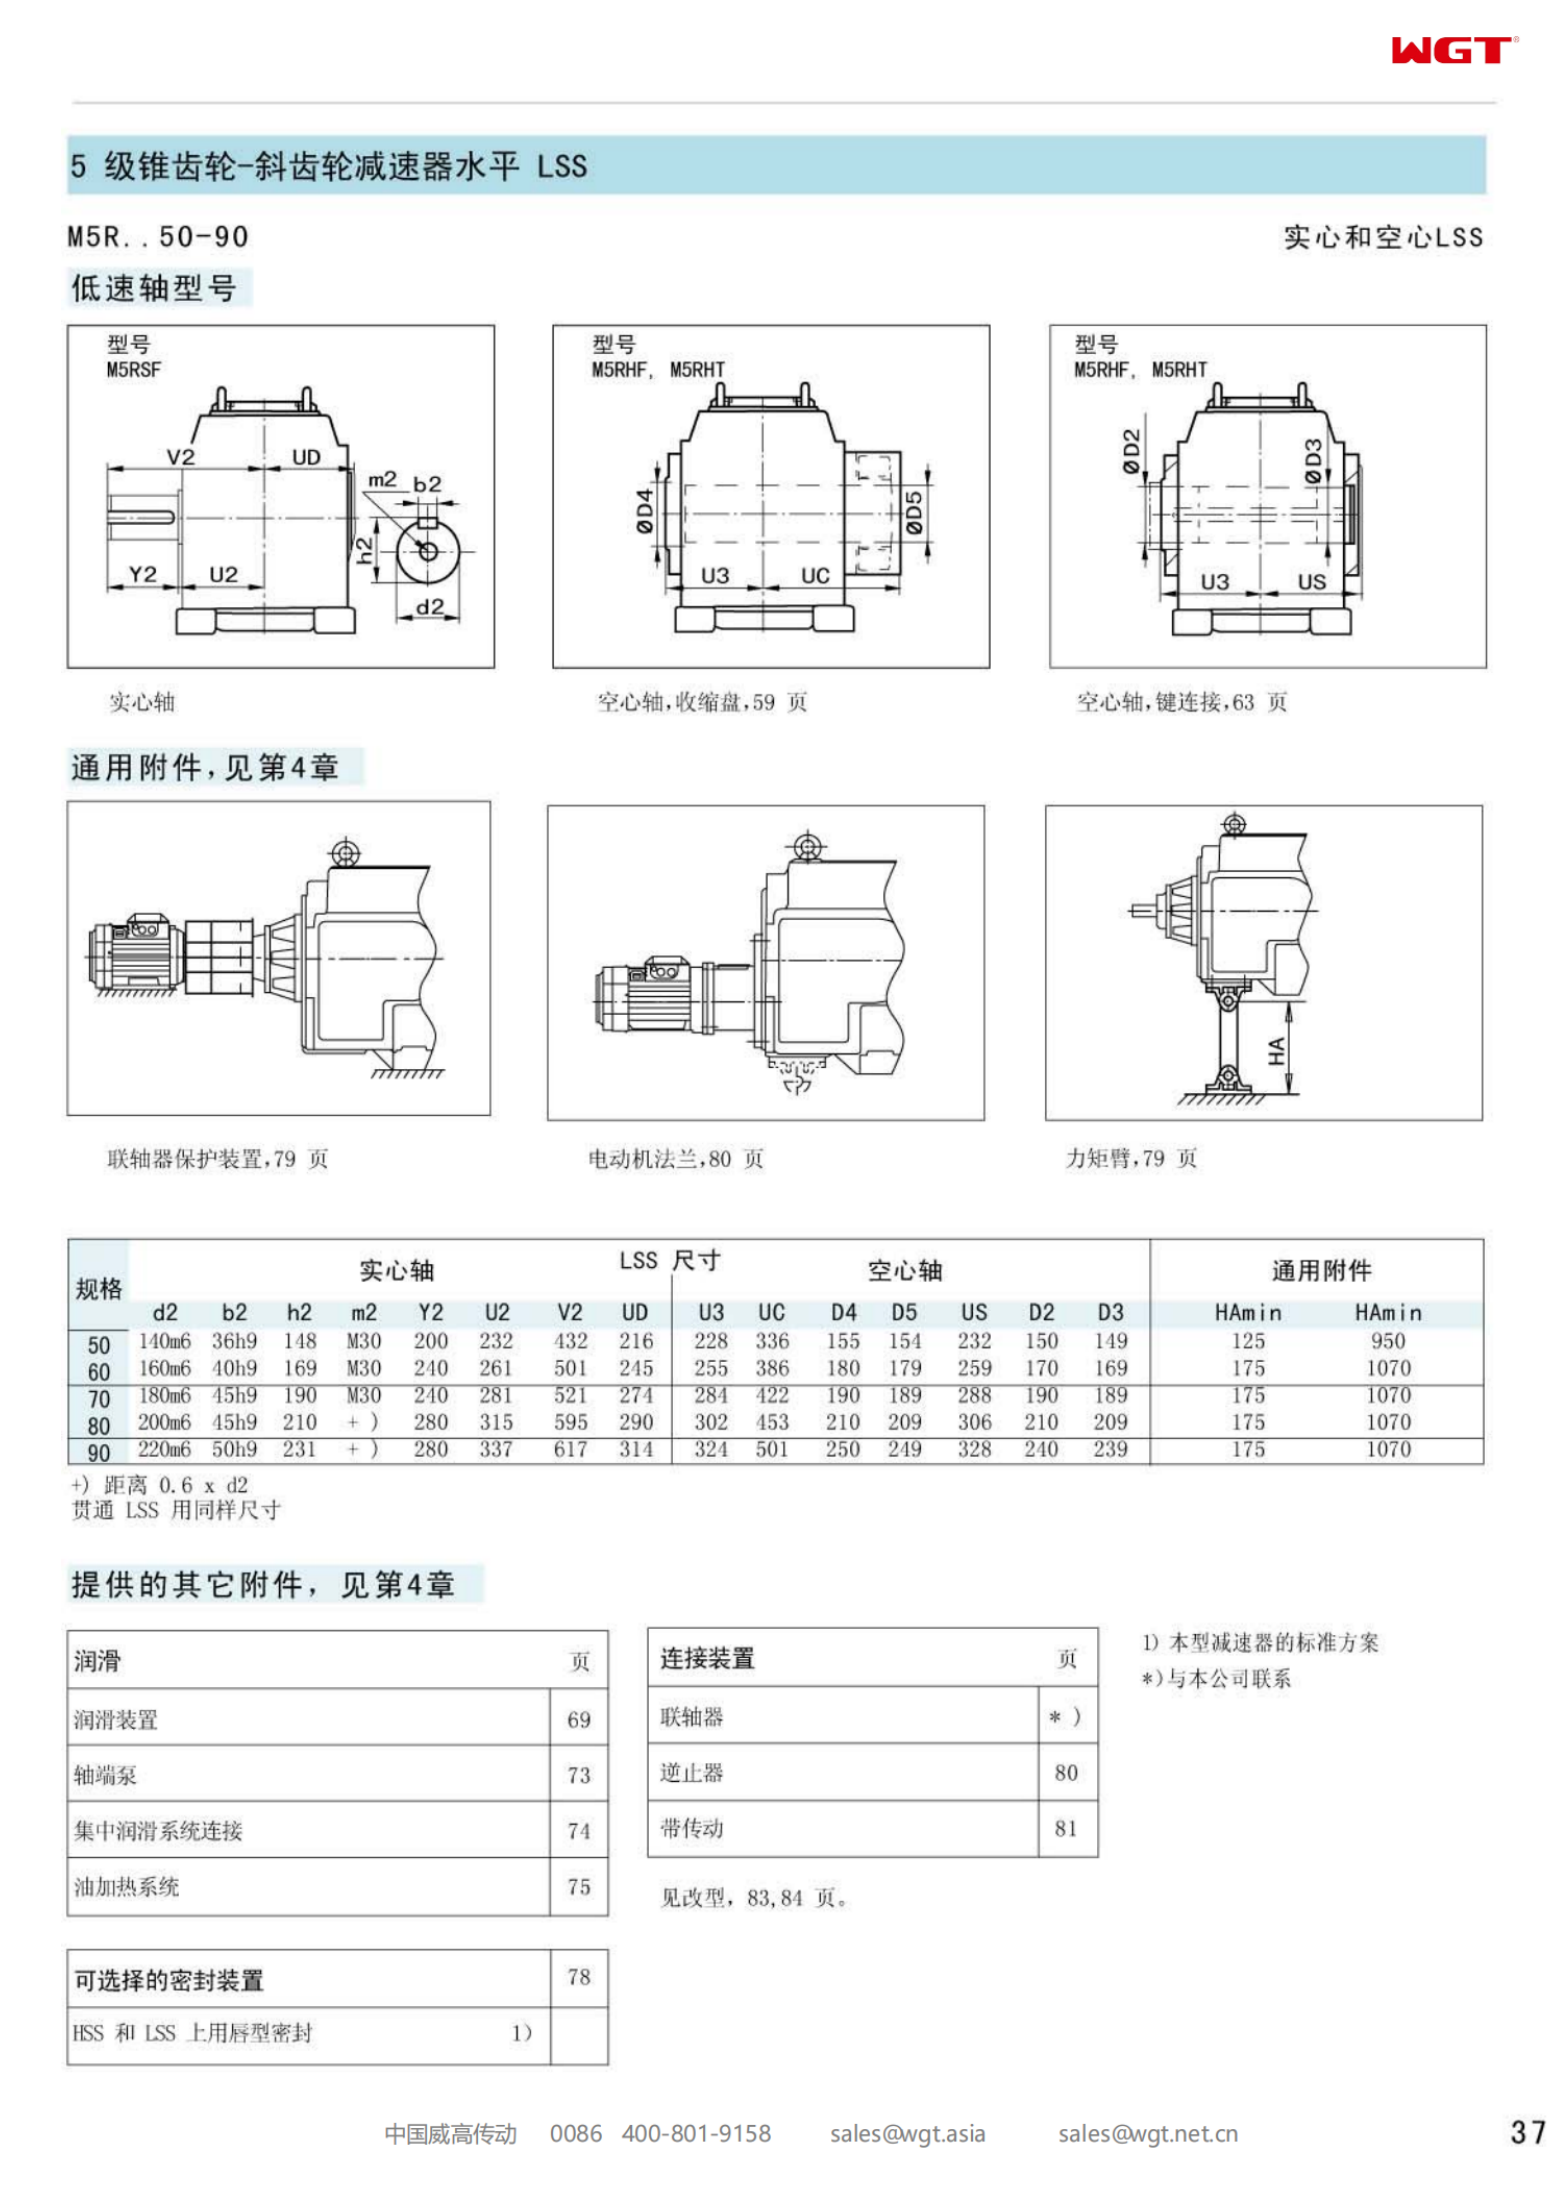 M5RHF70 Replace_SEW_M_Series Gearbox